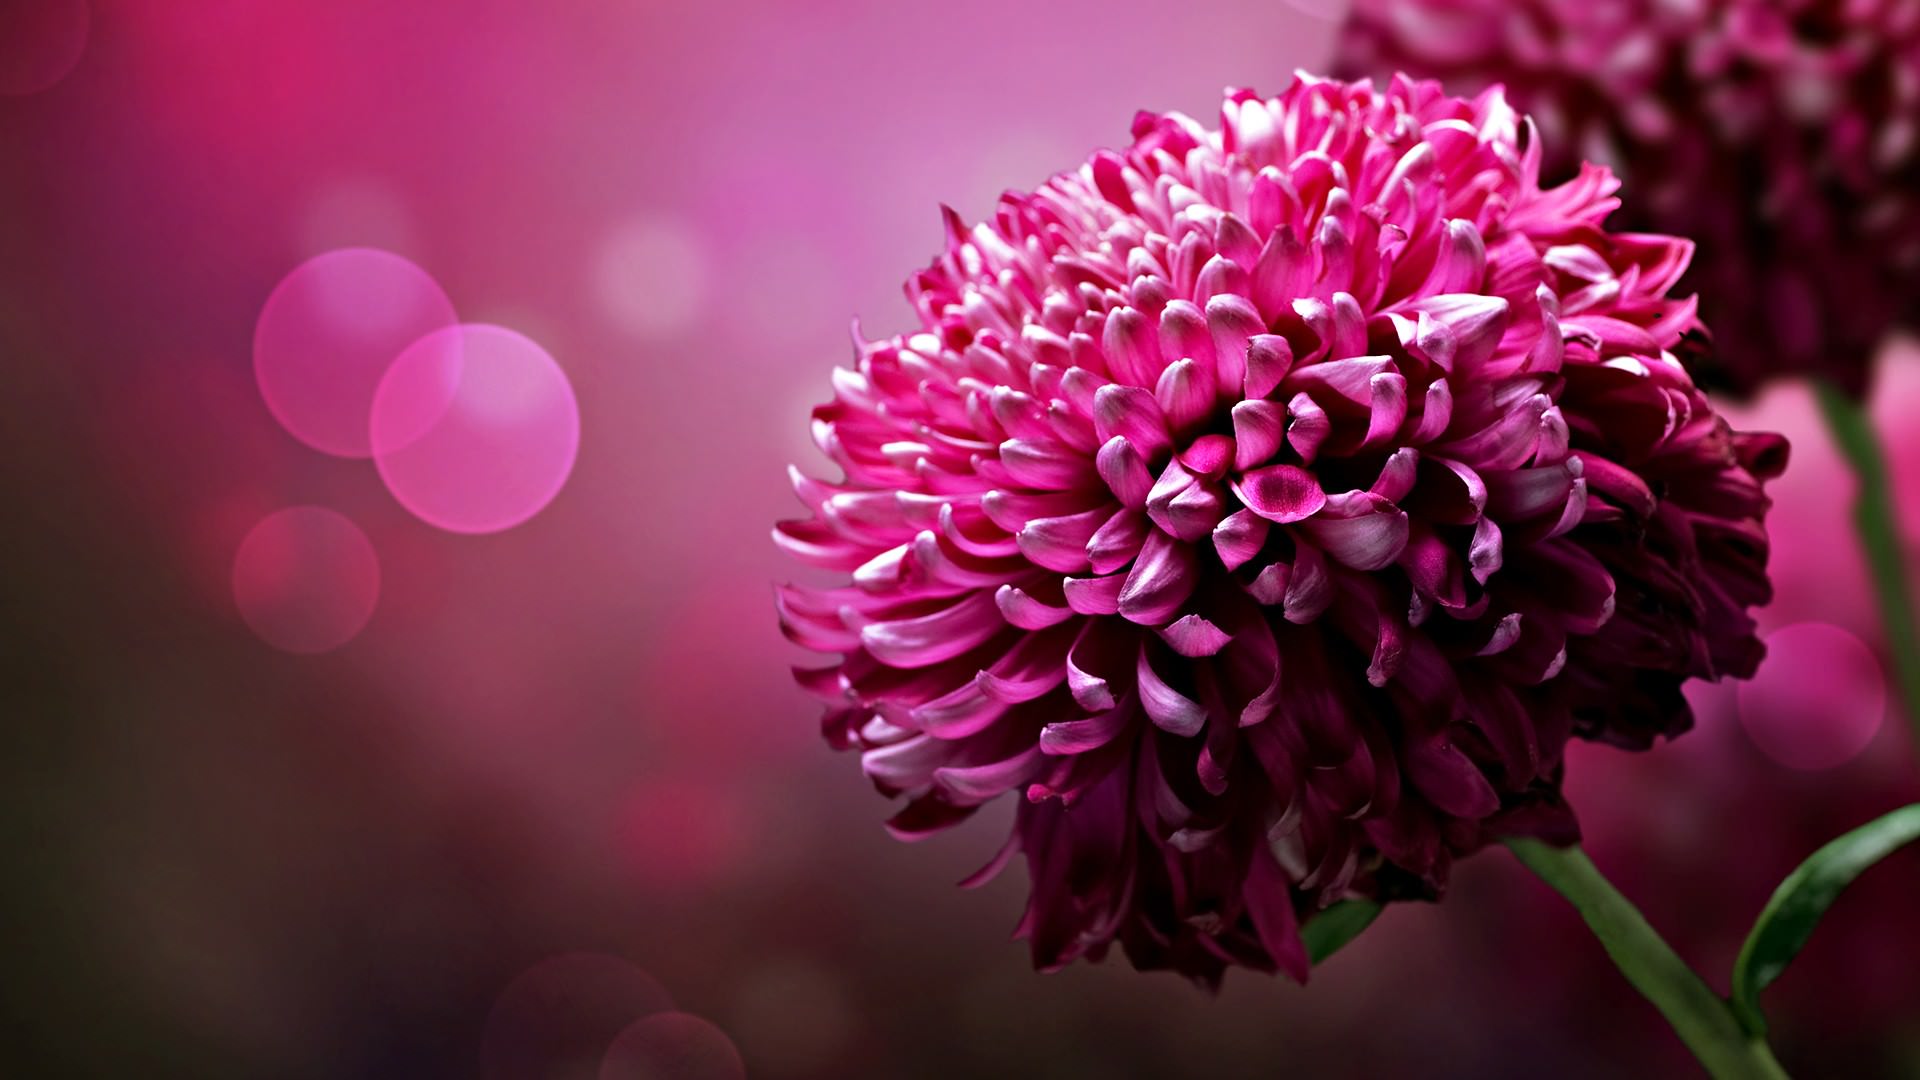 166+ Flower Backgrounds, Wallpapers, Pictures, Images | Design Trends - Premium PSD, Vector